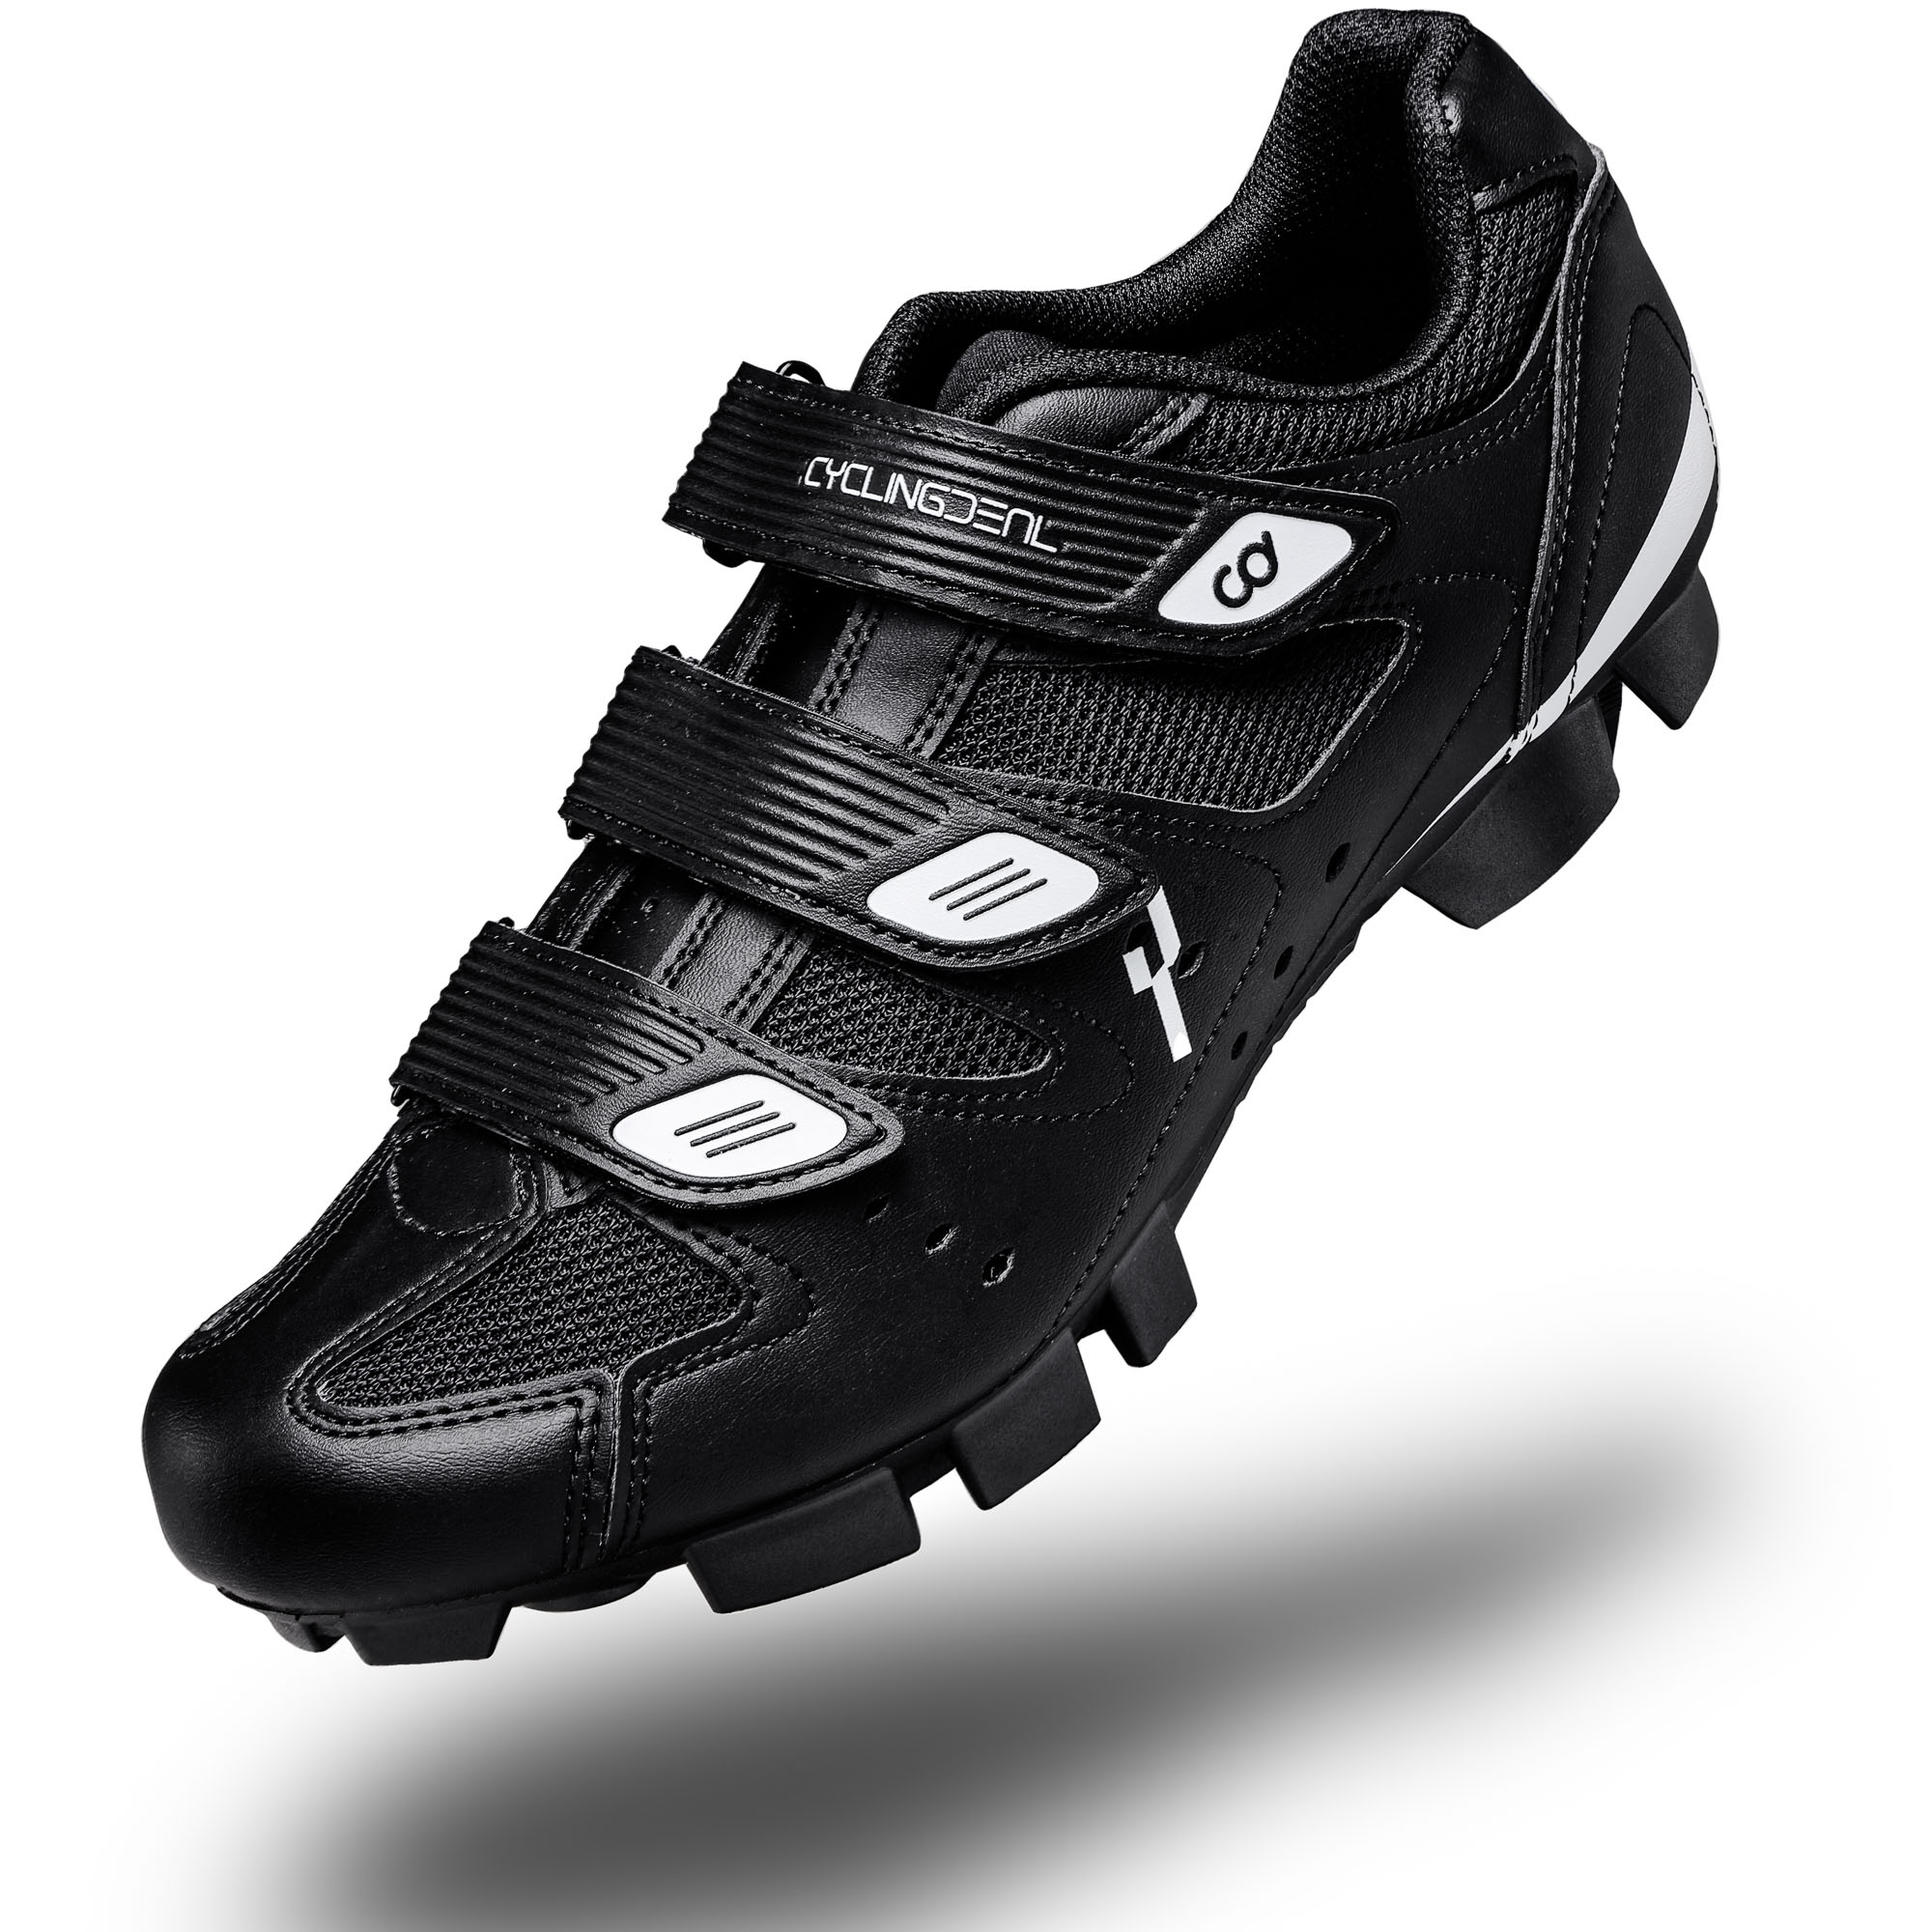 CyclingDeal Mountain Bicycle Bike Men's MTB Cycling Shoes Black Compatible with SHIMANO SPD and CrankBrothers Cleats | Size 50